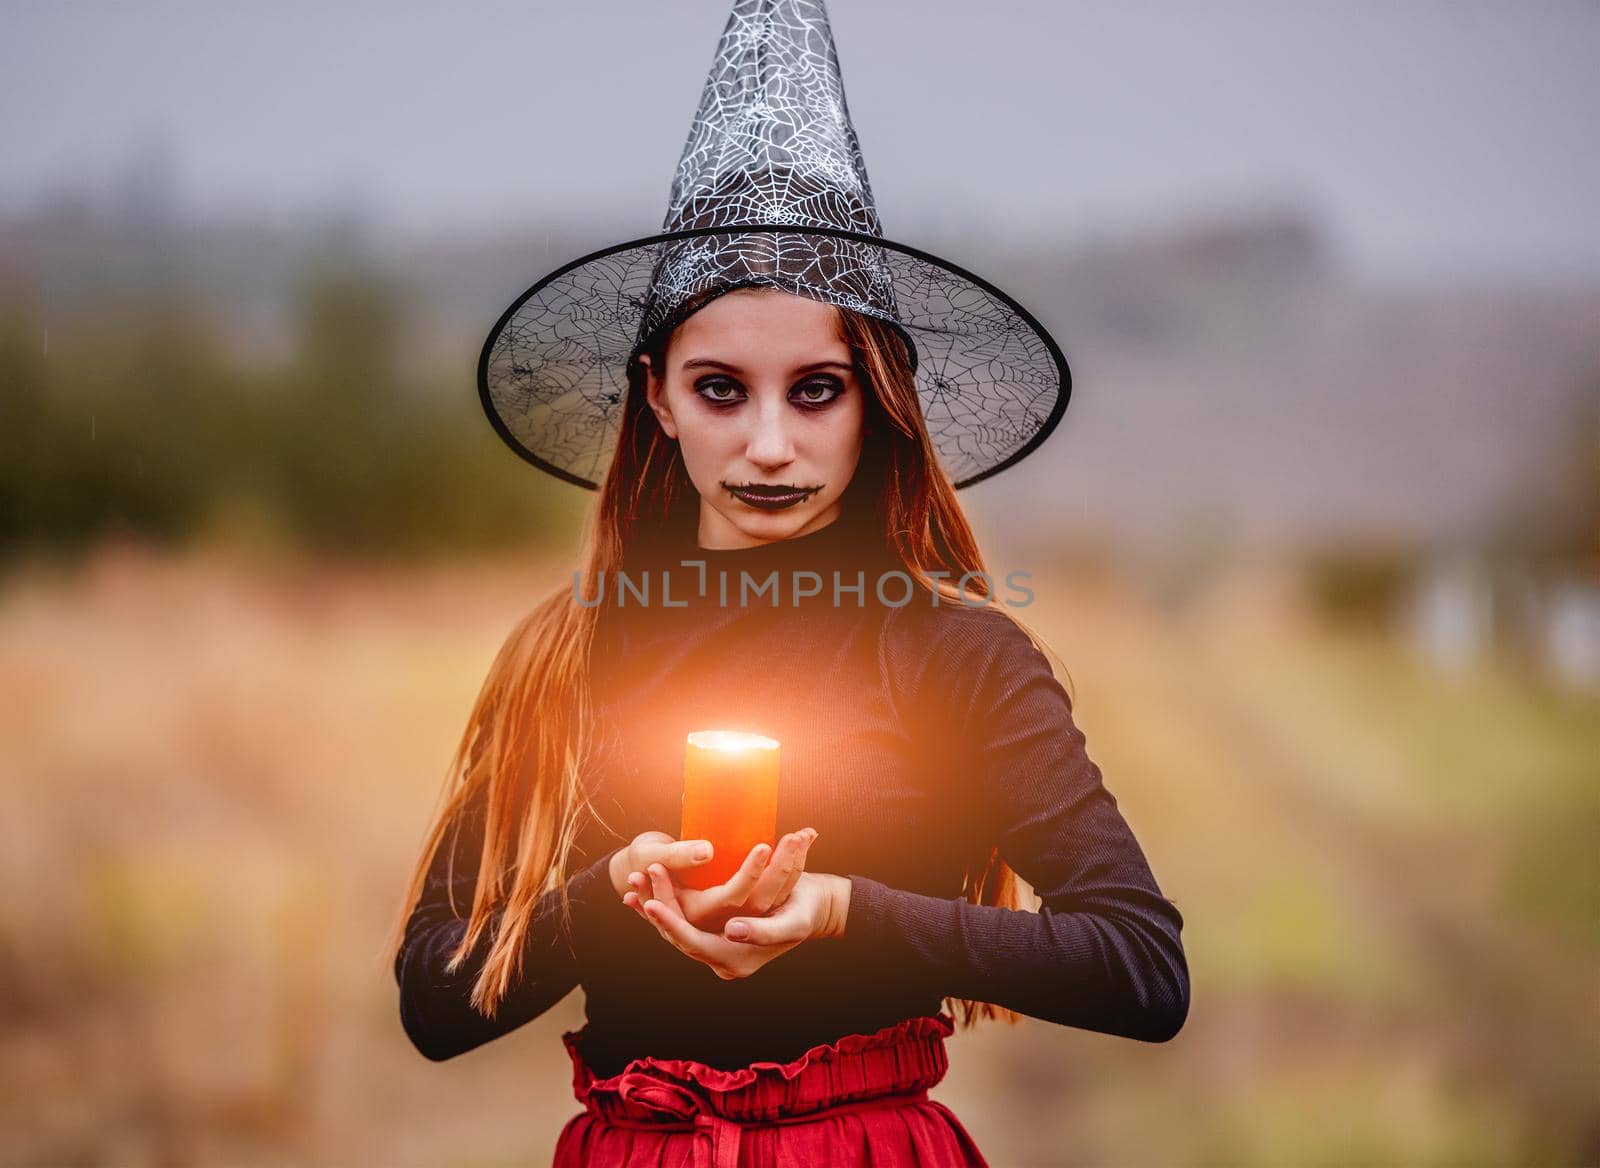 Young girl with halloween makeup holding burning candle on hands on autumn nature